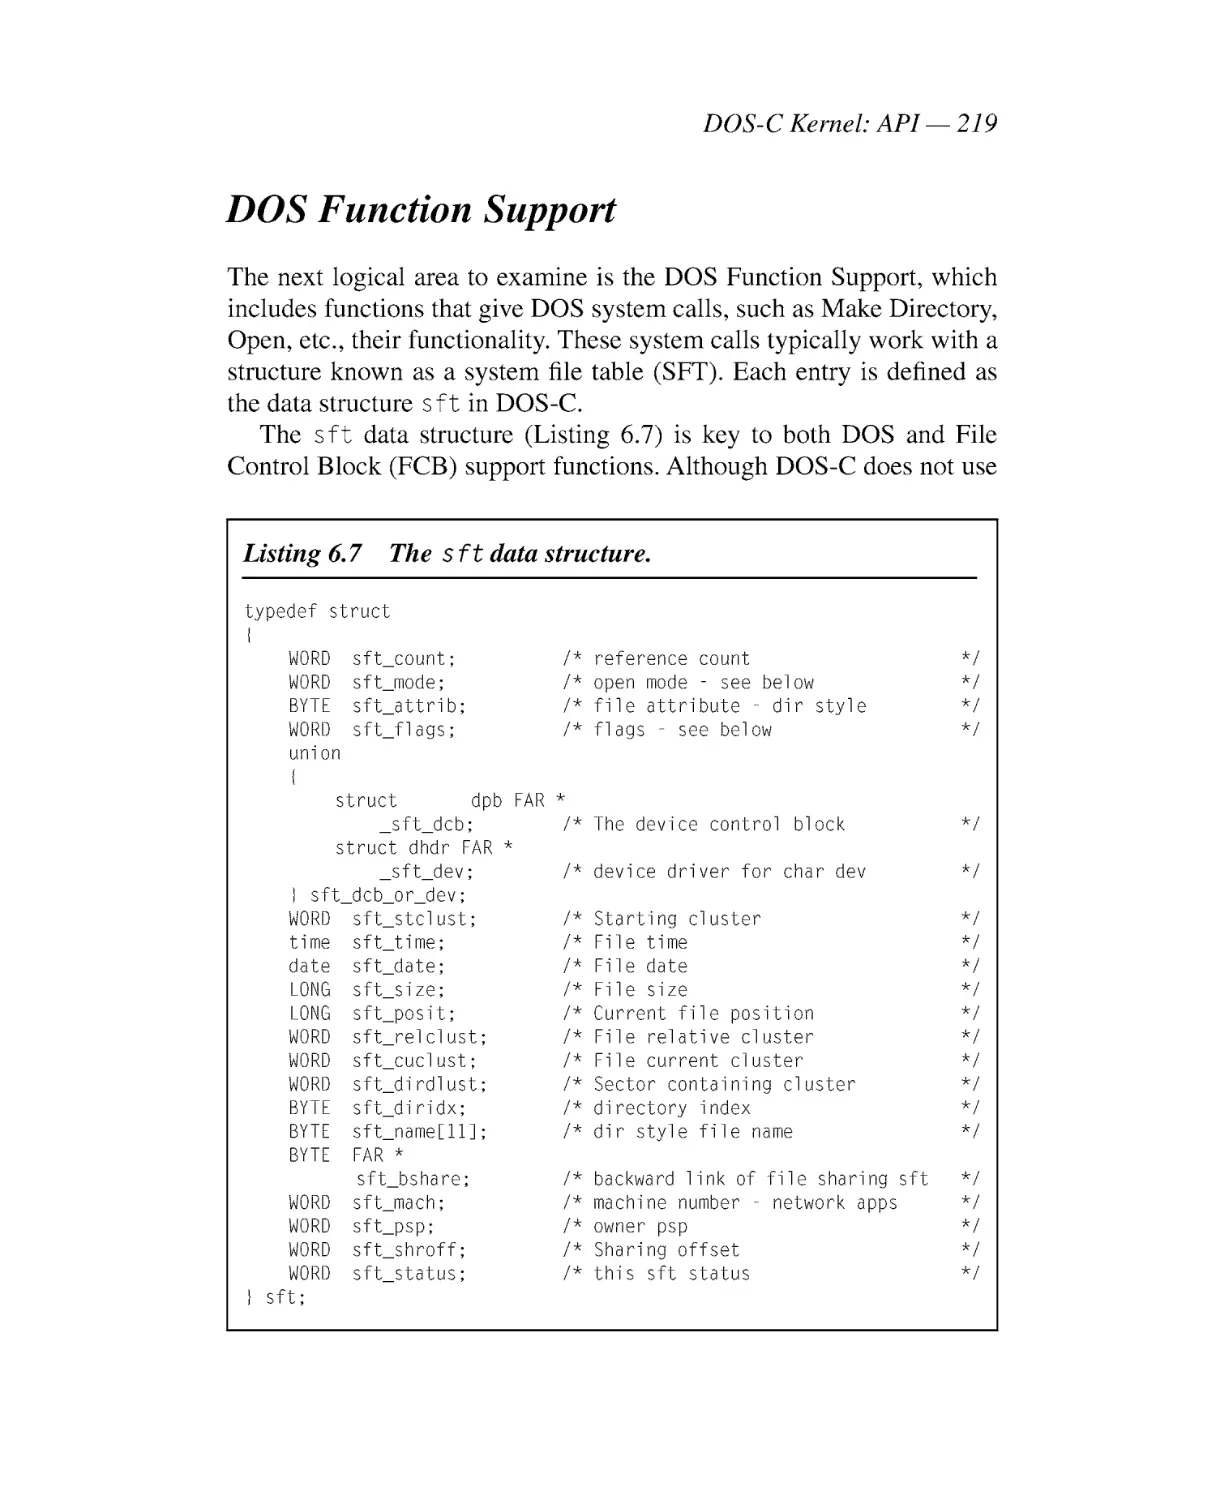 DOS Function Support